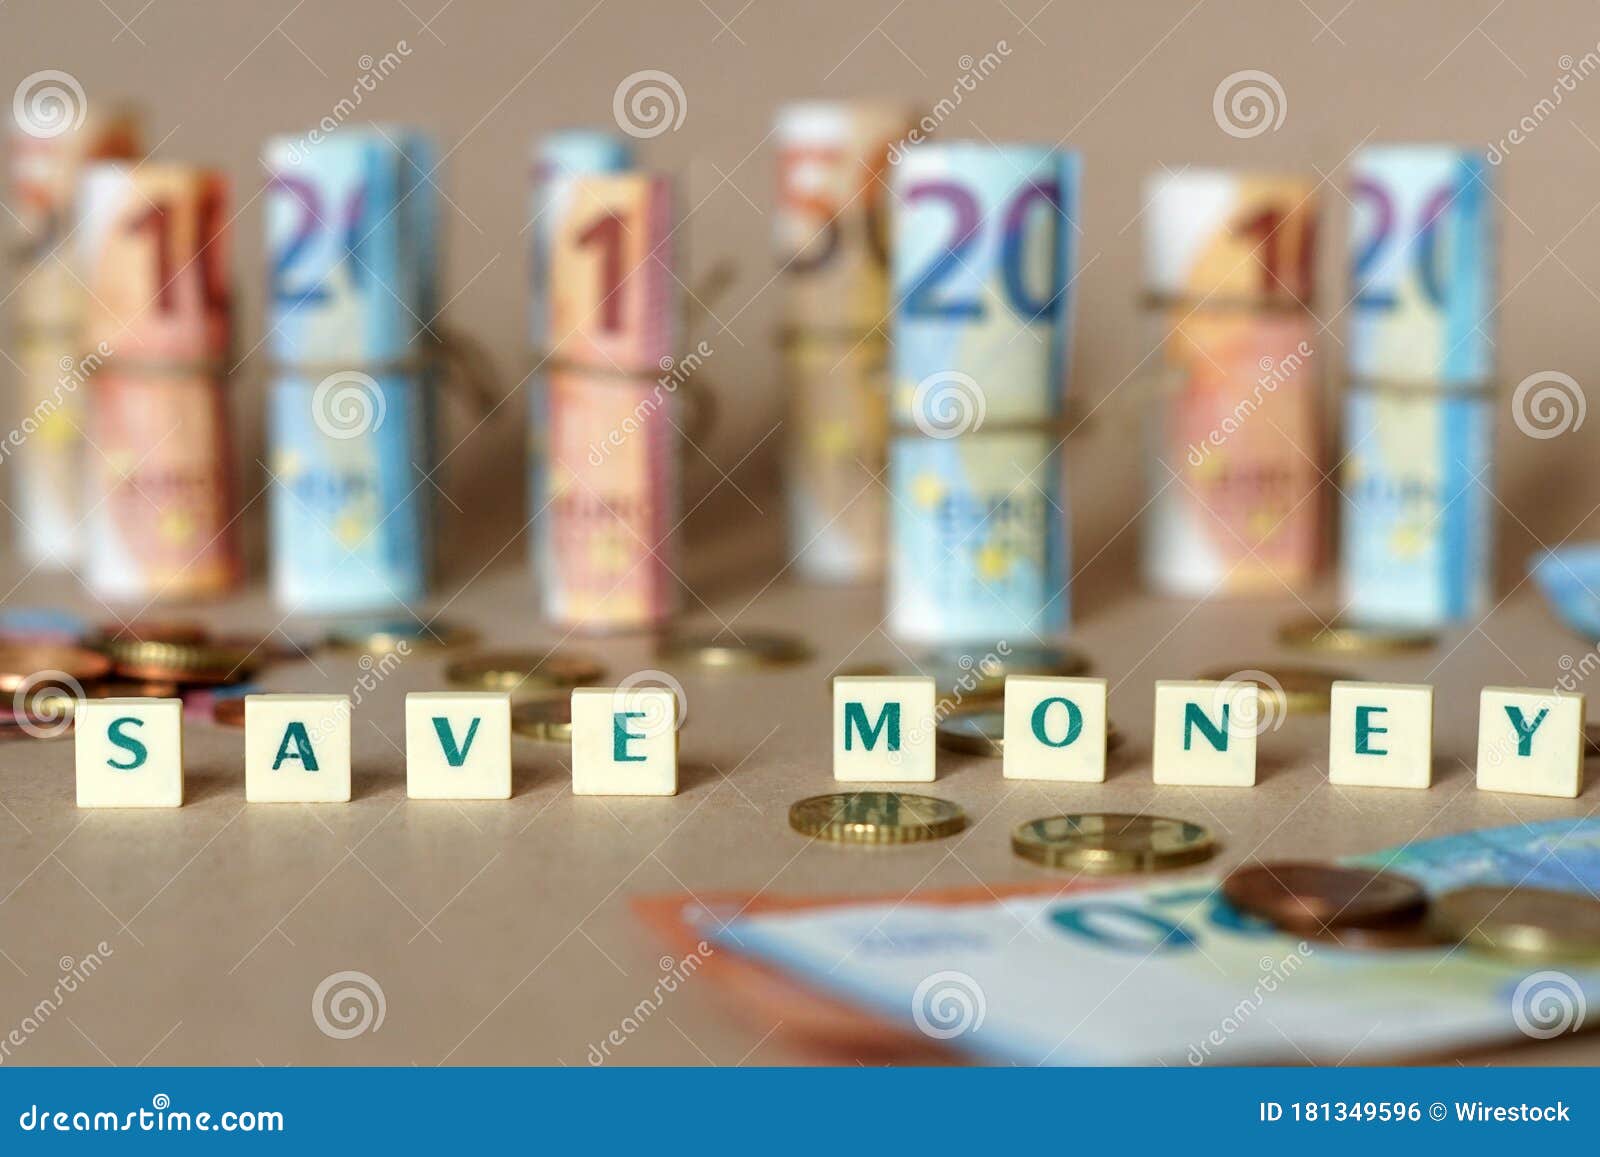 cubes spelling save money on the table with spanish dinero bills and coins